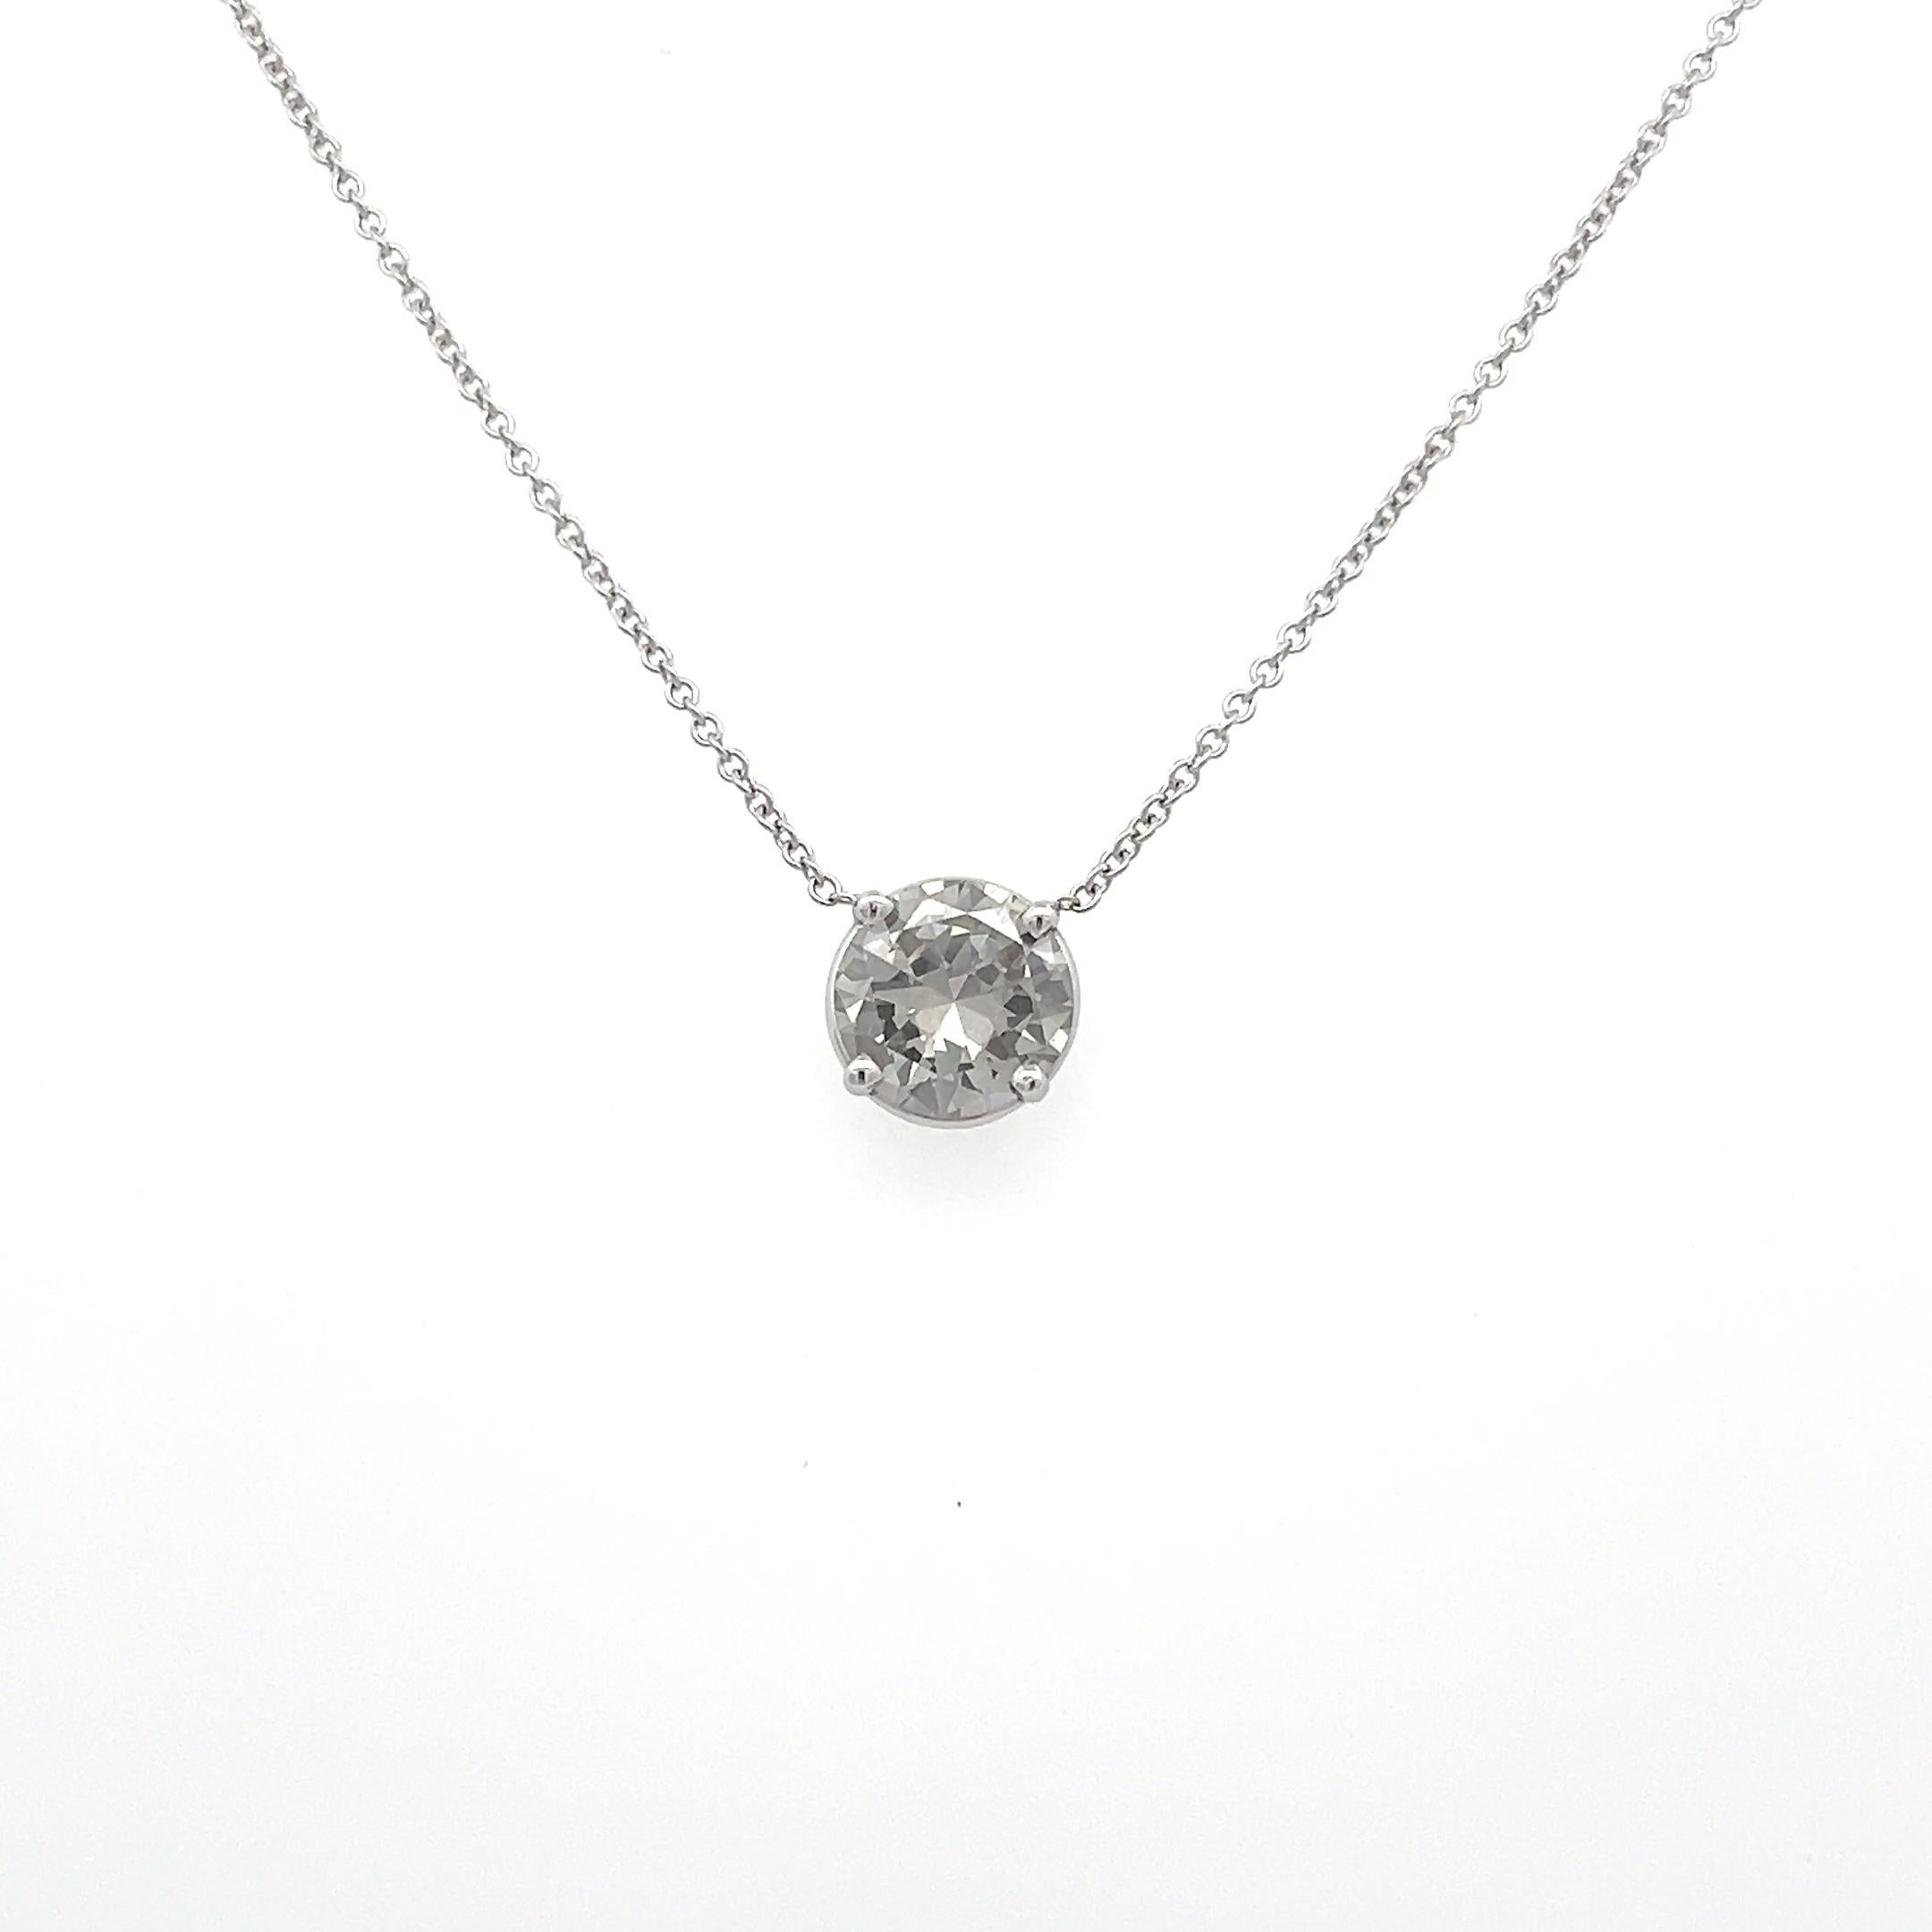 Natural grey diamond necklace, accompanied by a GIA report. This rare diamond is set in a 4 prong basket, and stationed in the center of a 1.3mm cable chain, which is adjustable from 16